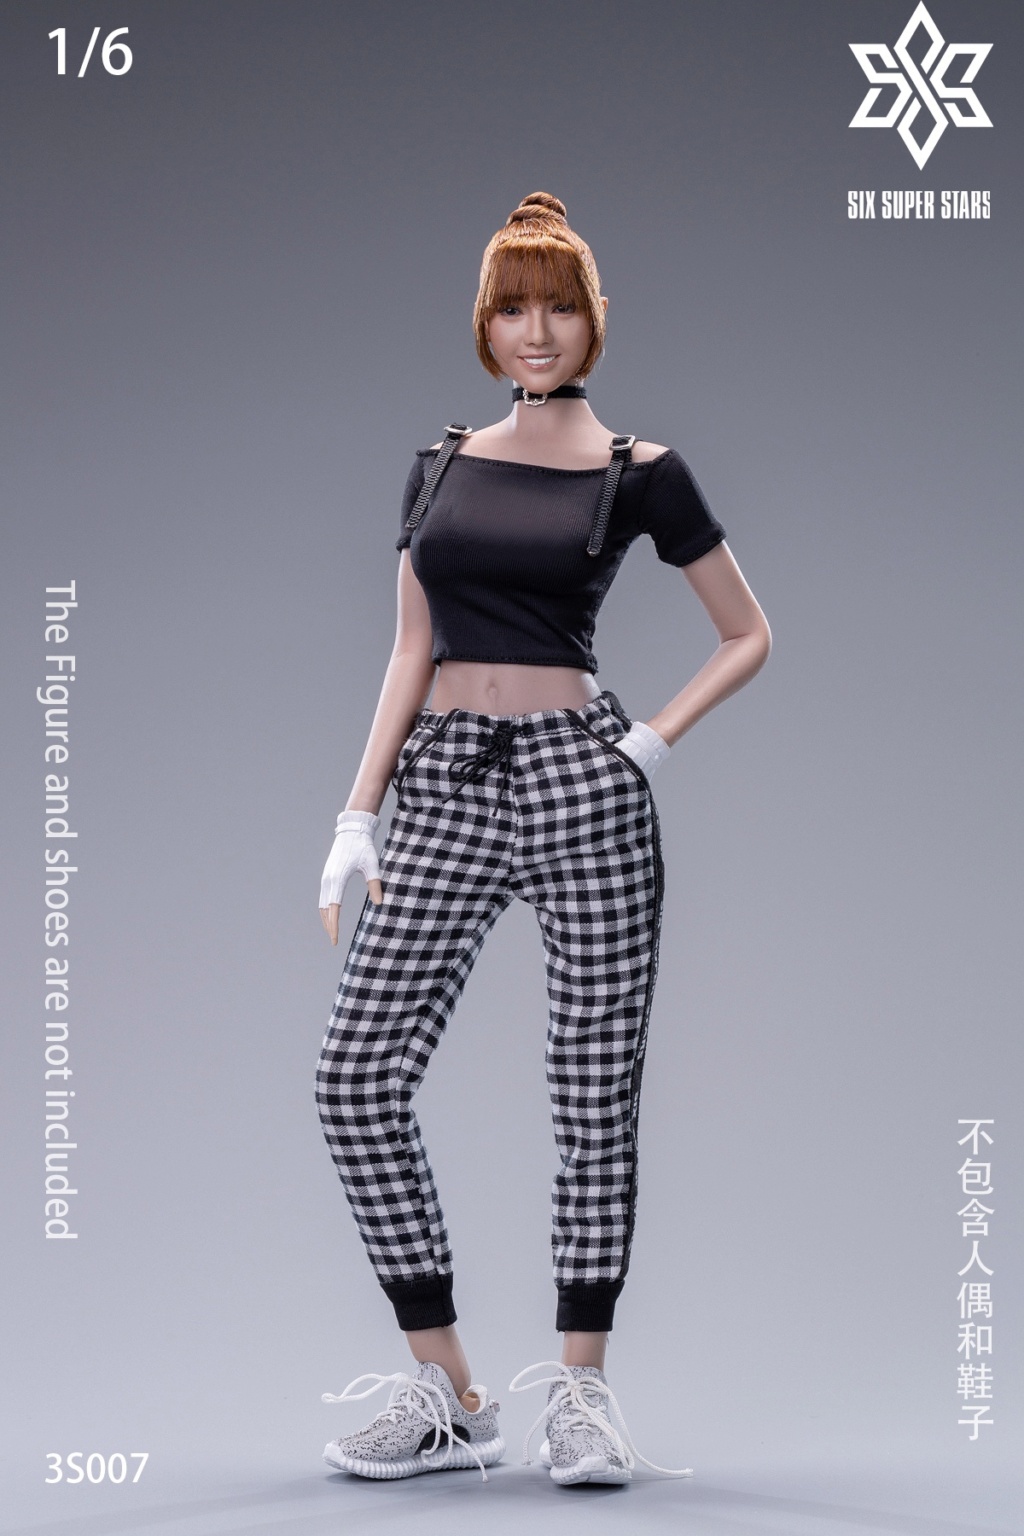 clothing - NEW PRODUCT: Six Super Star: 1/6 cool girl skirt suit/check pants/functional suit female soldier costume 14464710